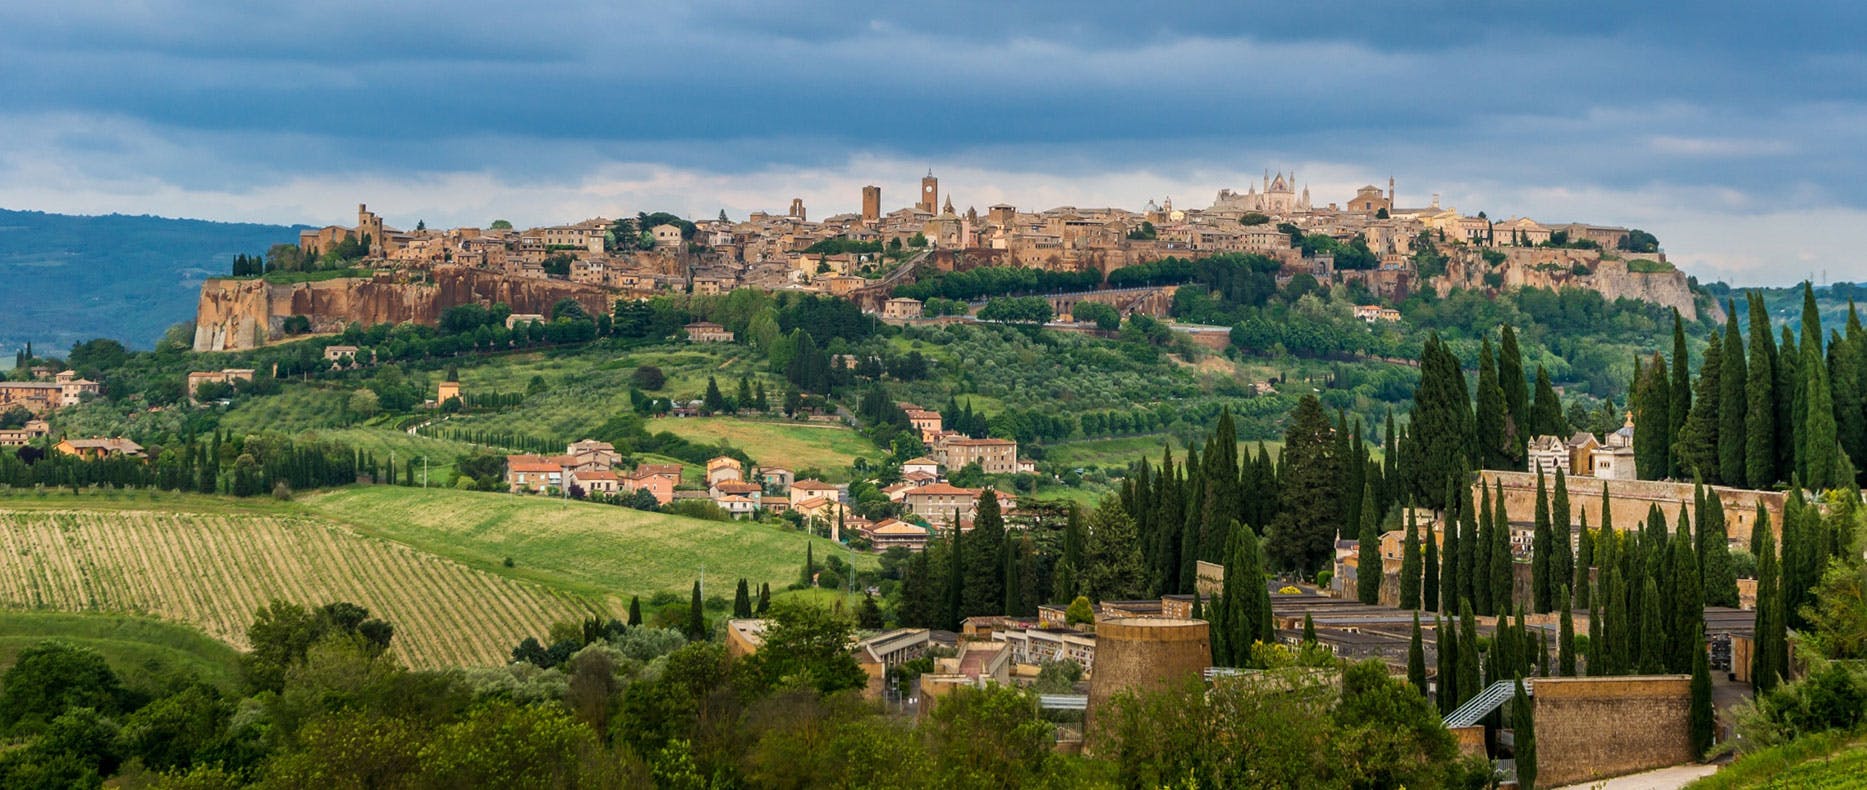 private-transfer-florence-to-rome-with-stop-in-orvieto-or-vv_94022_J2reOHW